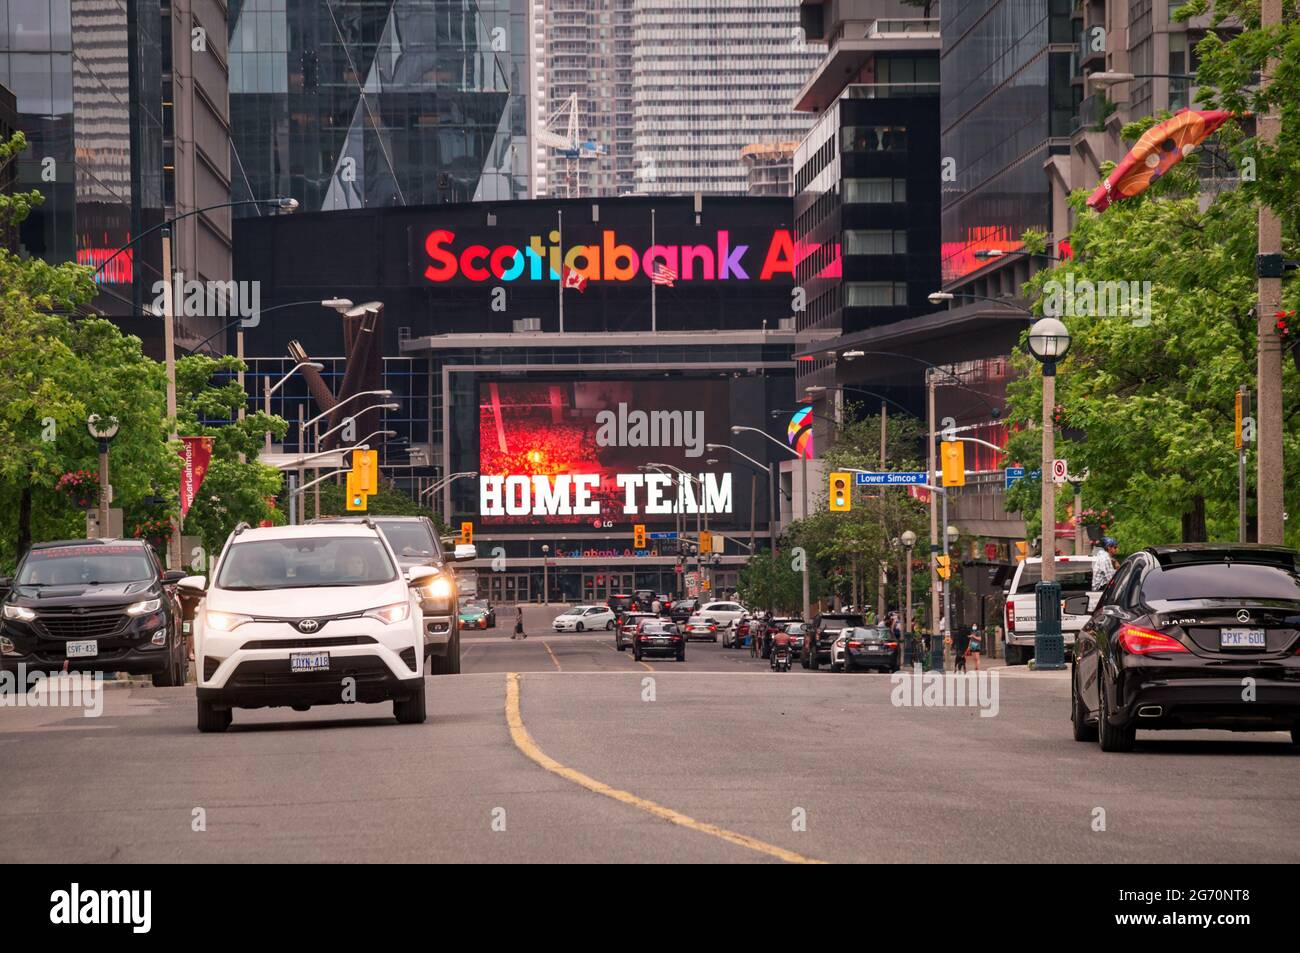 TORONTO, CANADA - 06 05 2021: Summer view along Bremner Blvd in downtown Toronto with cars in foreground and Scotiabank Arena building with enormous Stock Photo